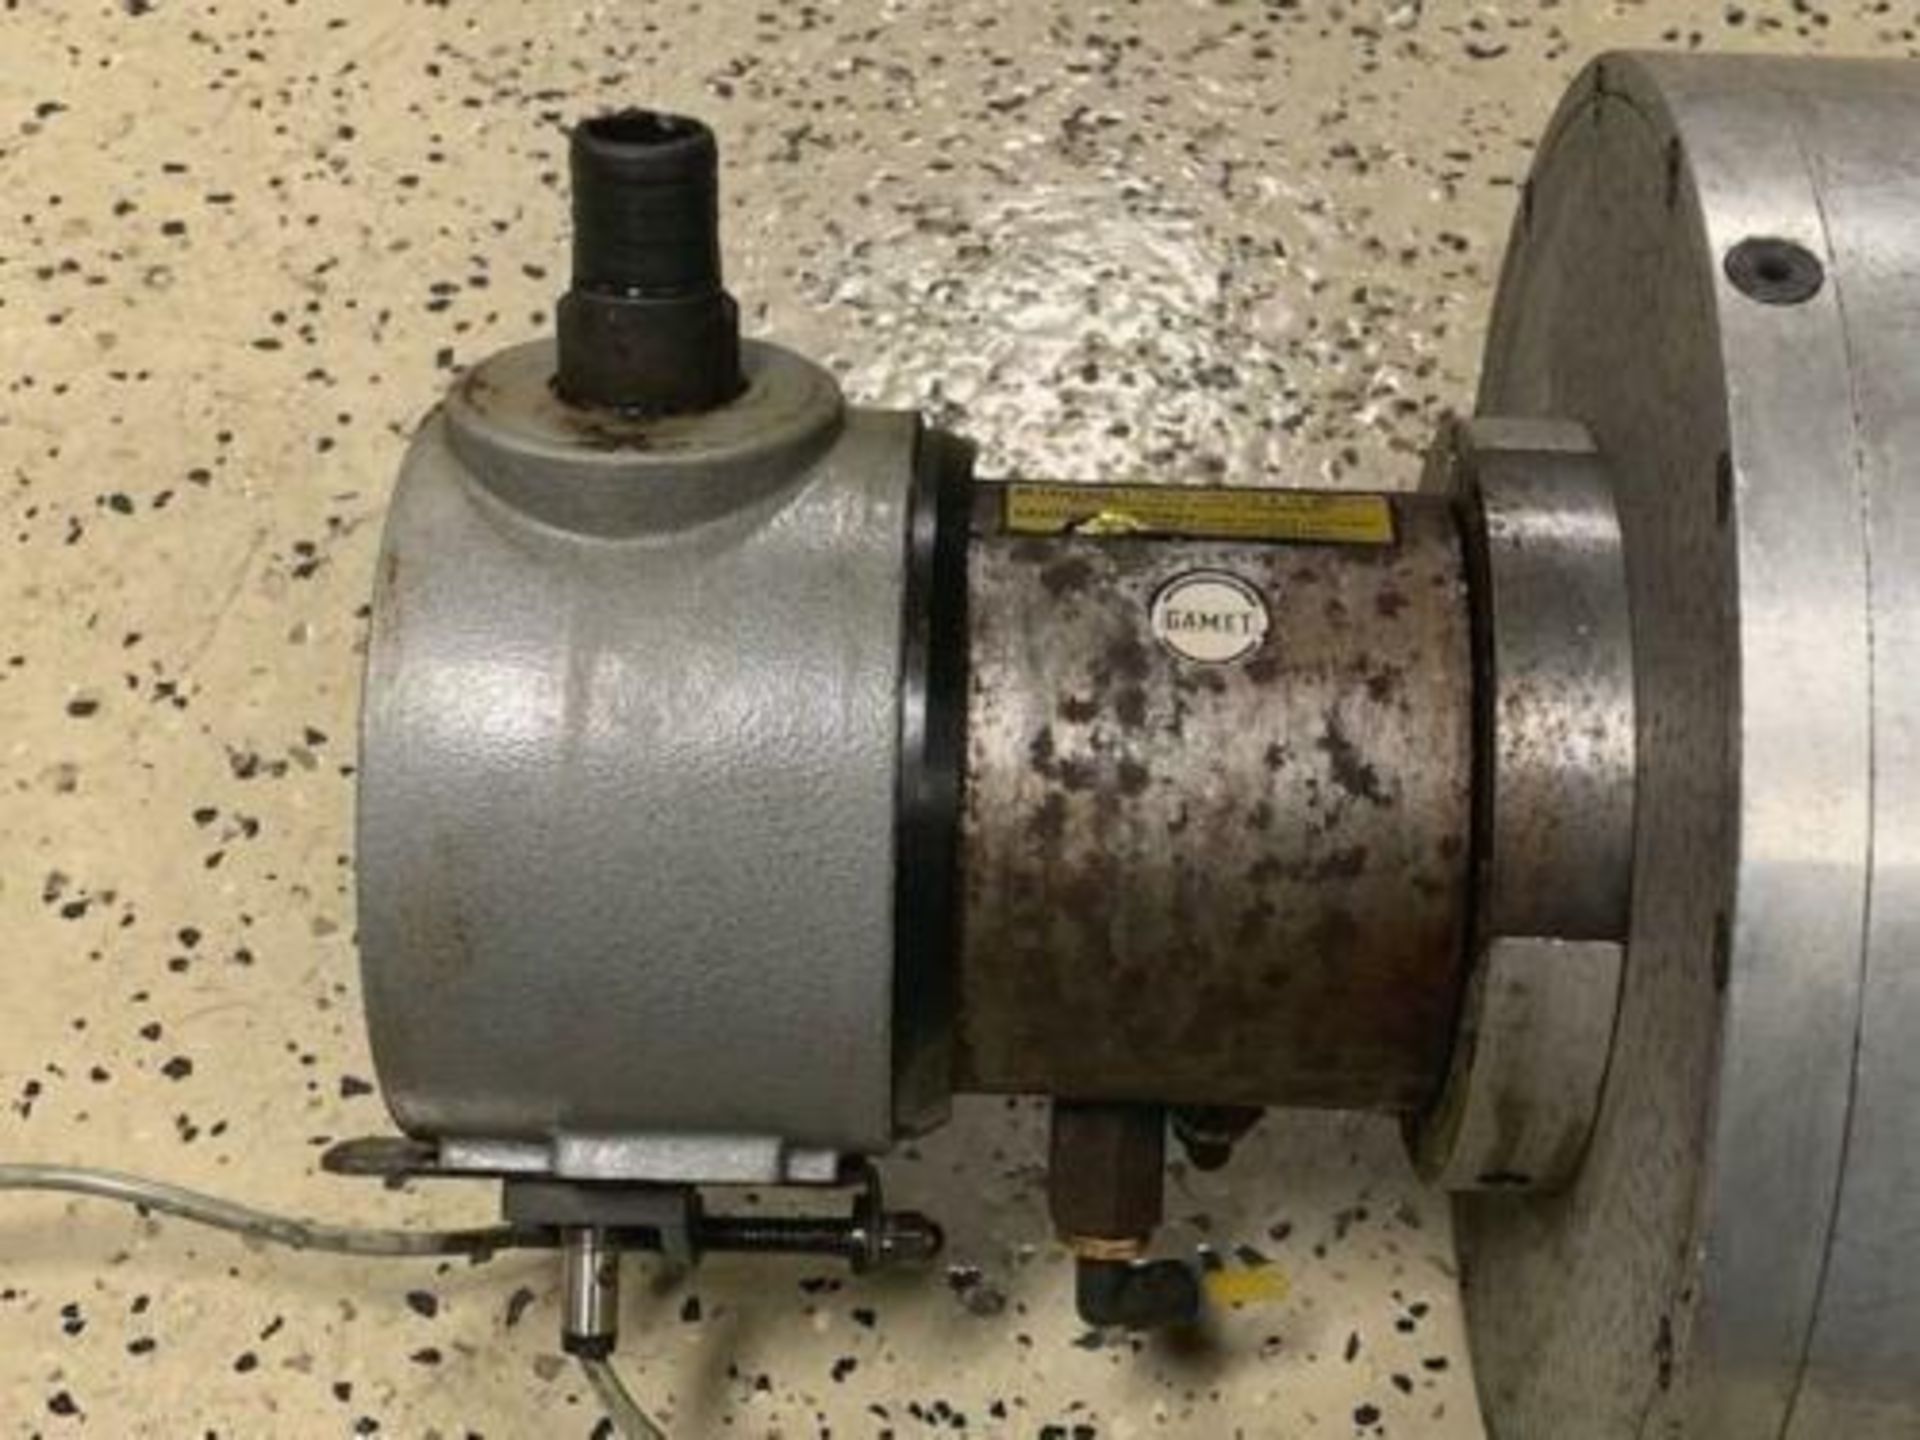 Gamet Hydraulic Chuck Actuator off Clausing Colchester CNC 100, 60mm Dia Tube OD - Image 2 of 5